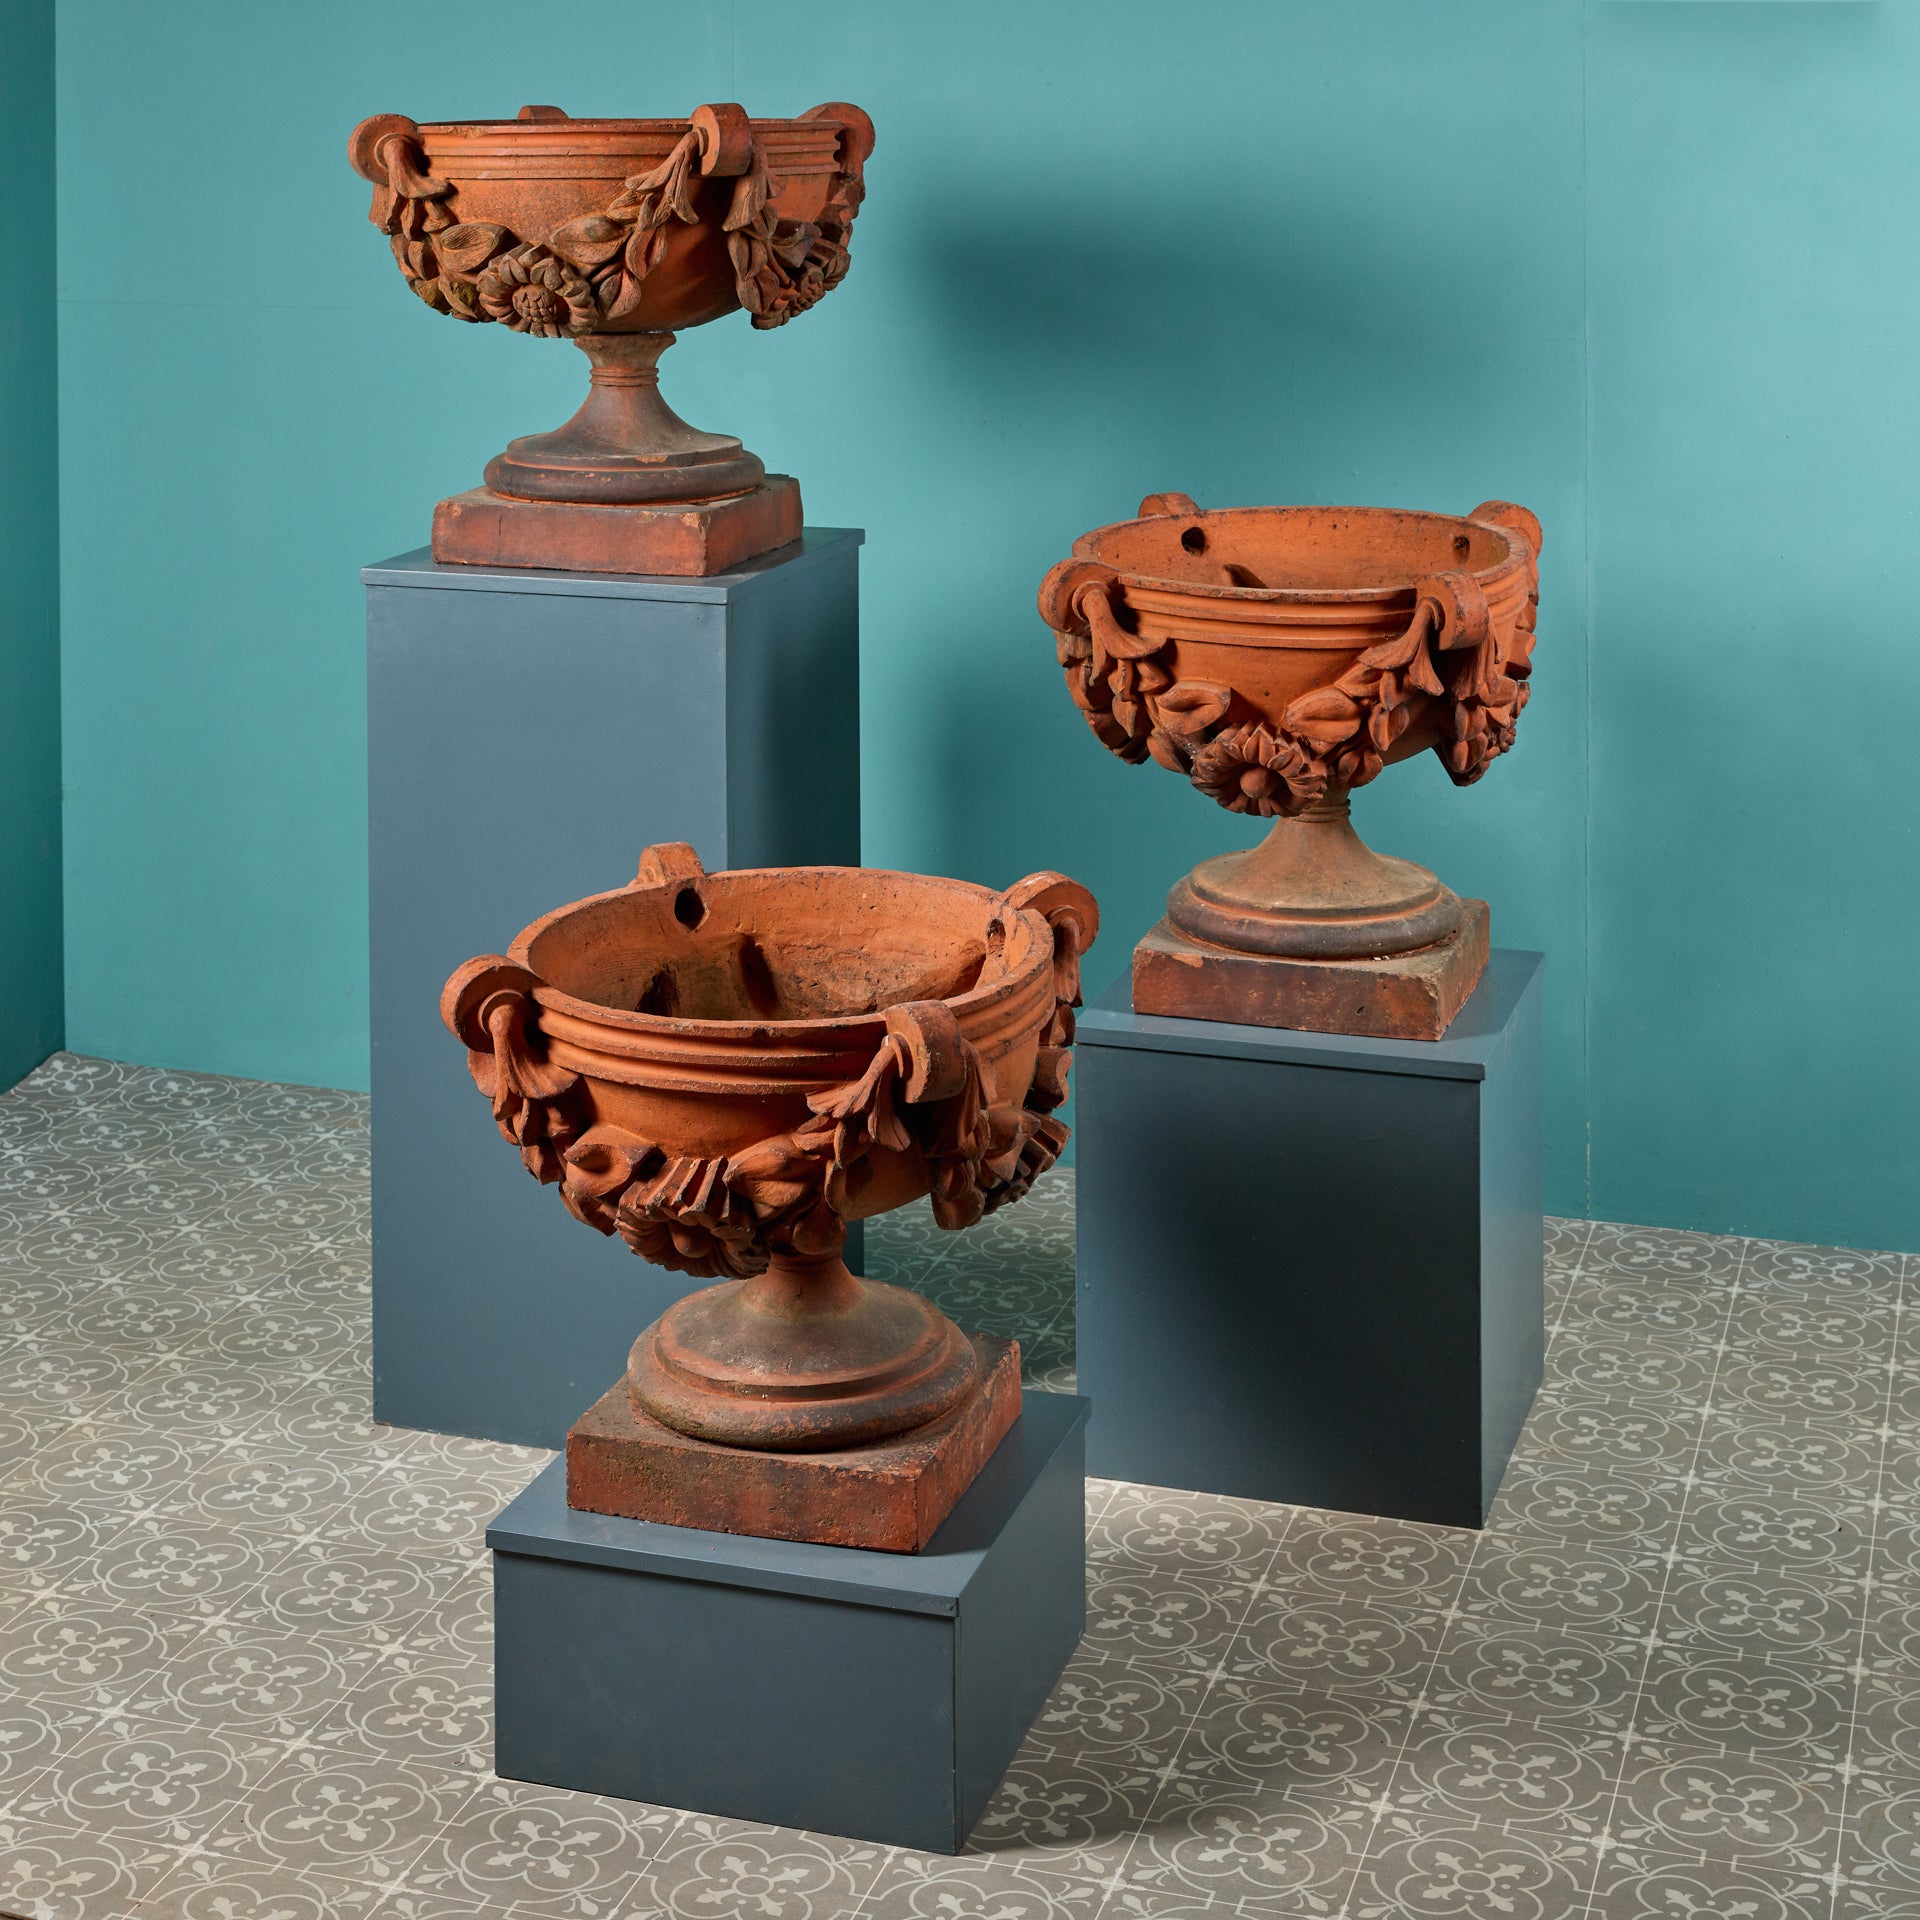 An impressive set of three large scale antique terracotta jardinieres or vases in the classical style, perfect for use as statuary or planters in a garden. Dating from 19th century England, these antique garden urns have stood the test of time for